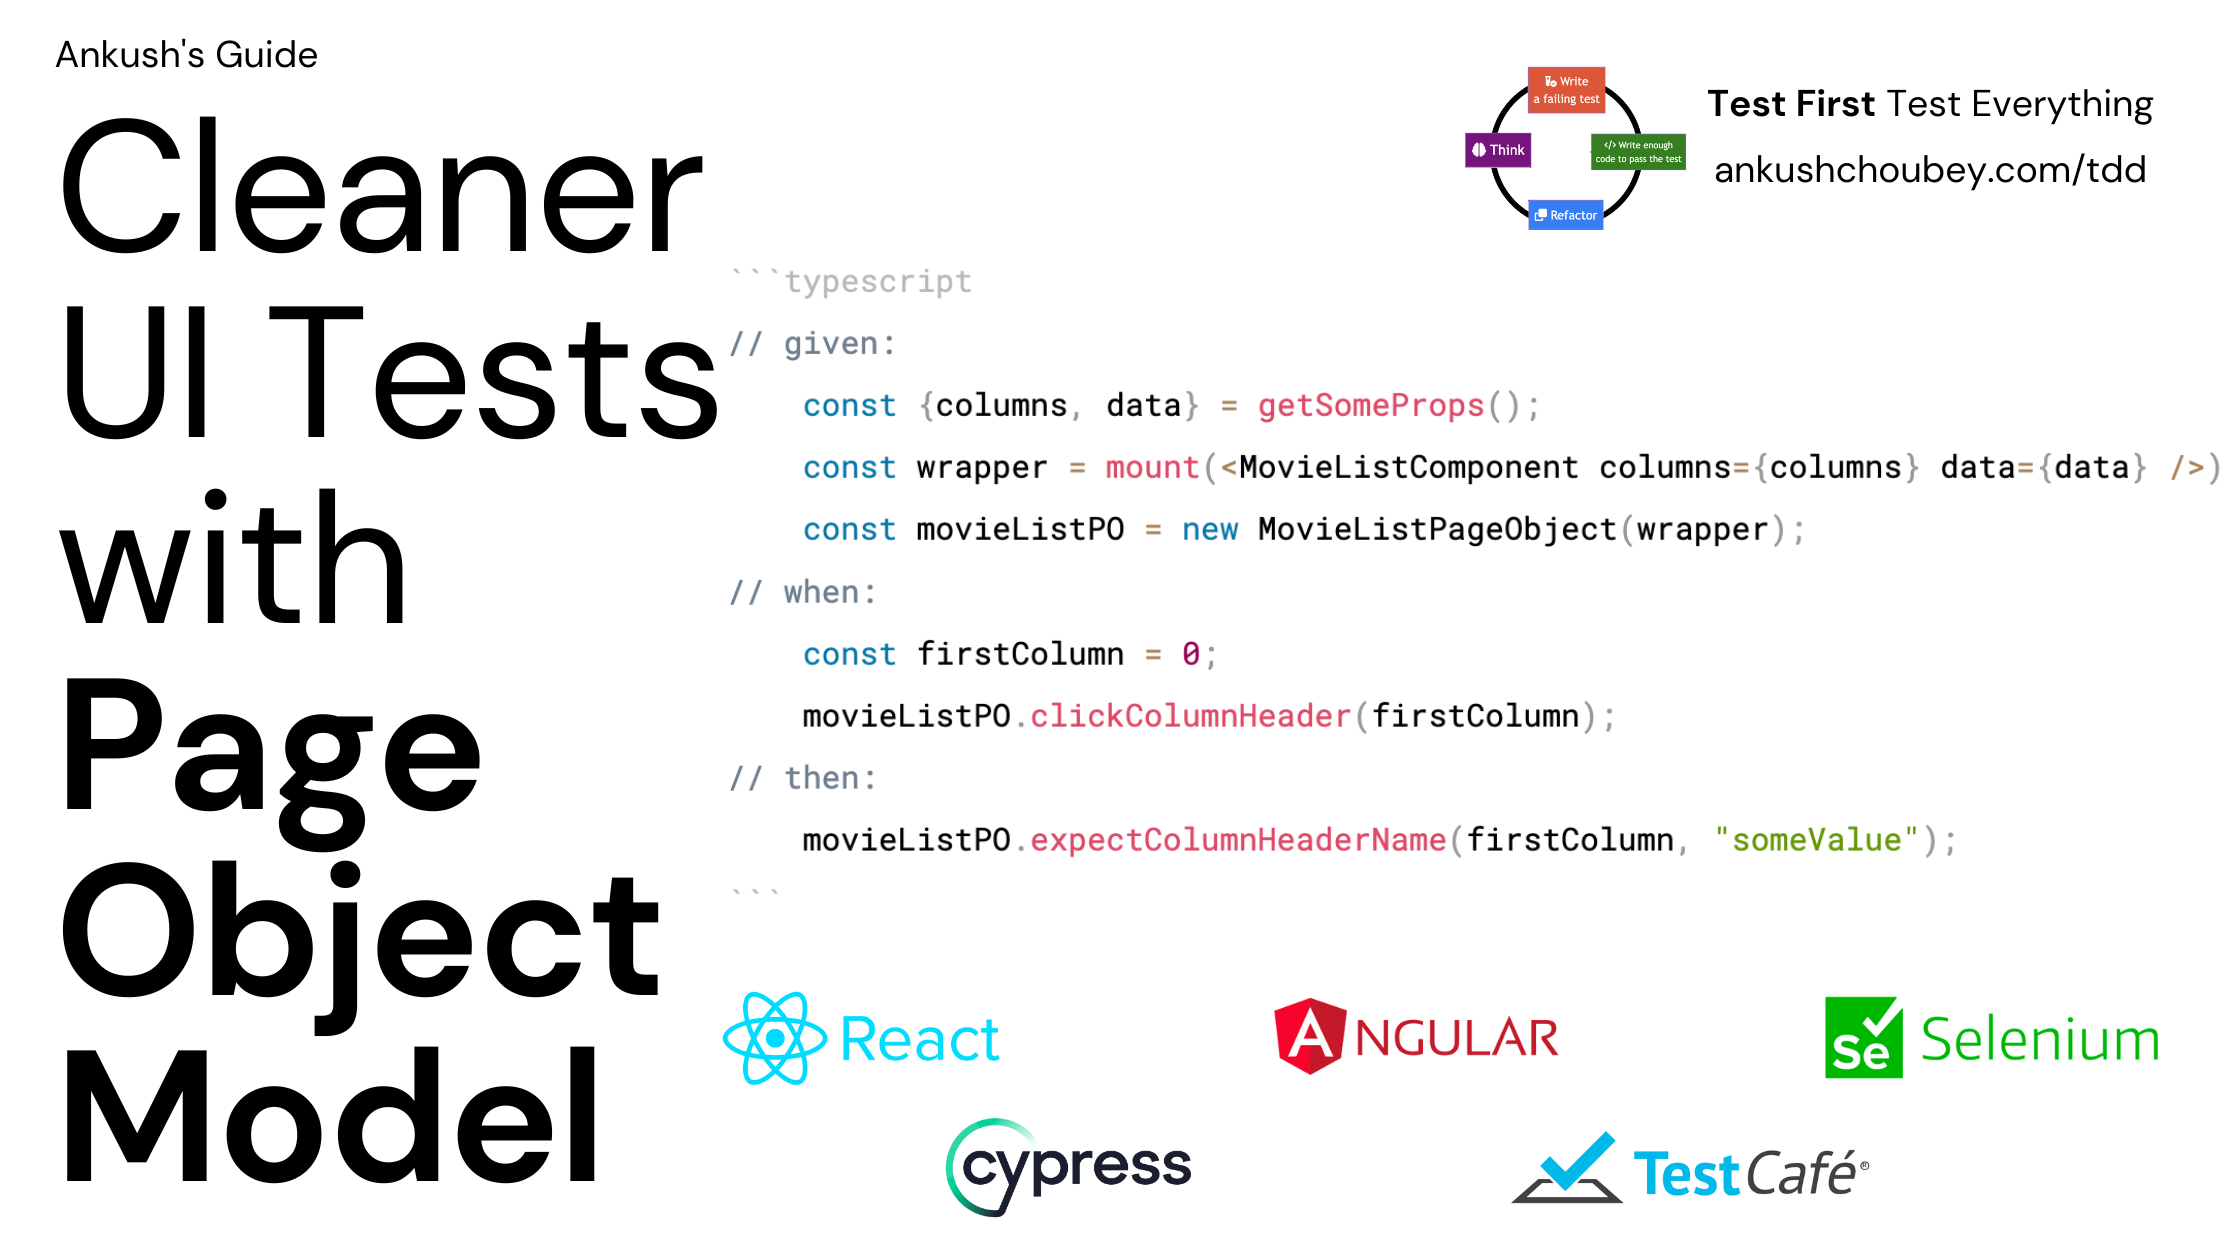 Page Object Model can be used with any testing framework to write cleaner and simpler tests that are fast to write.